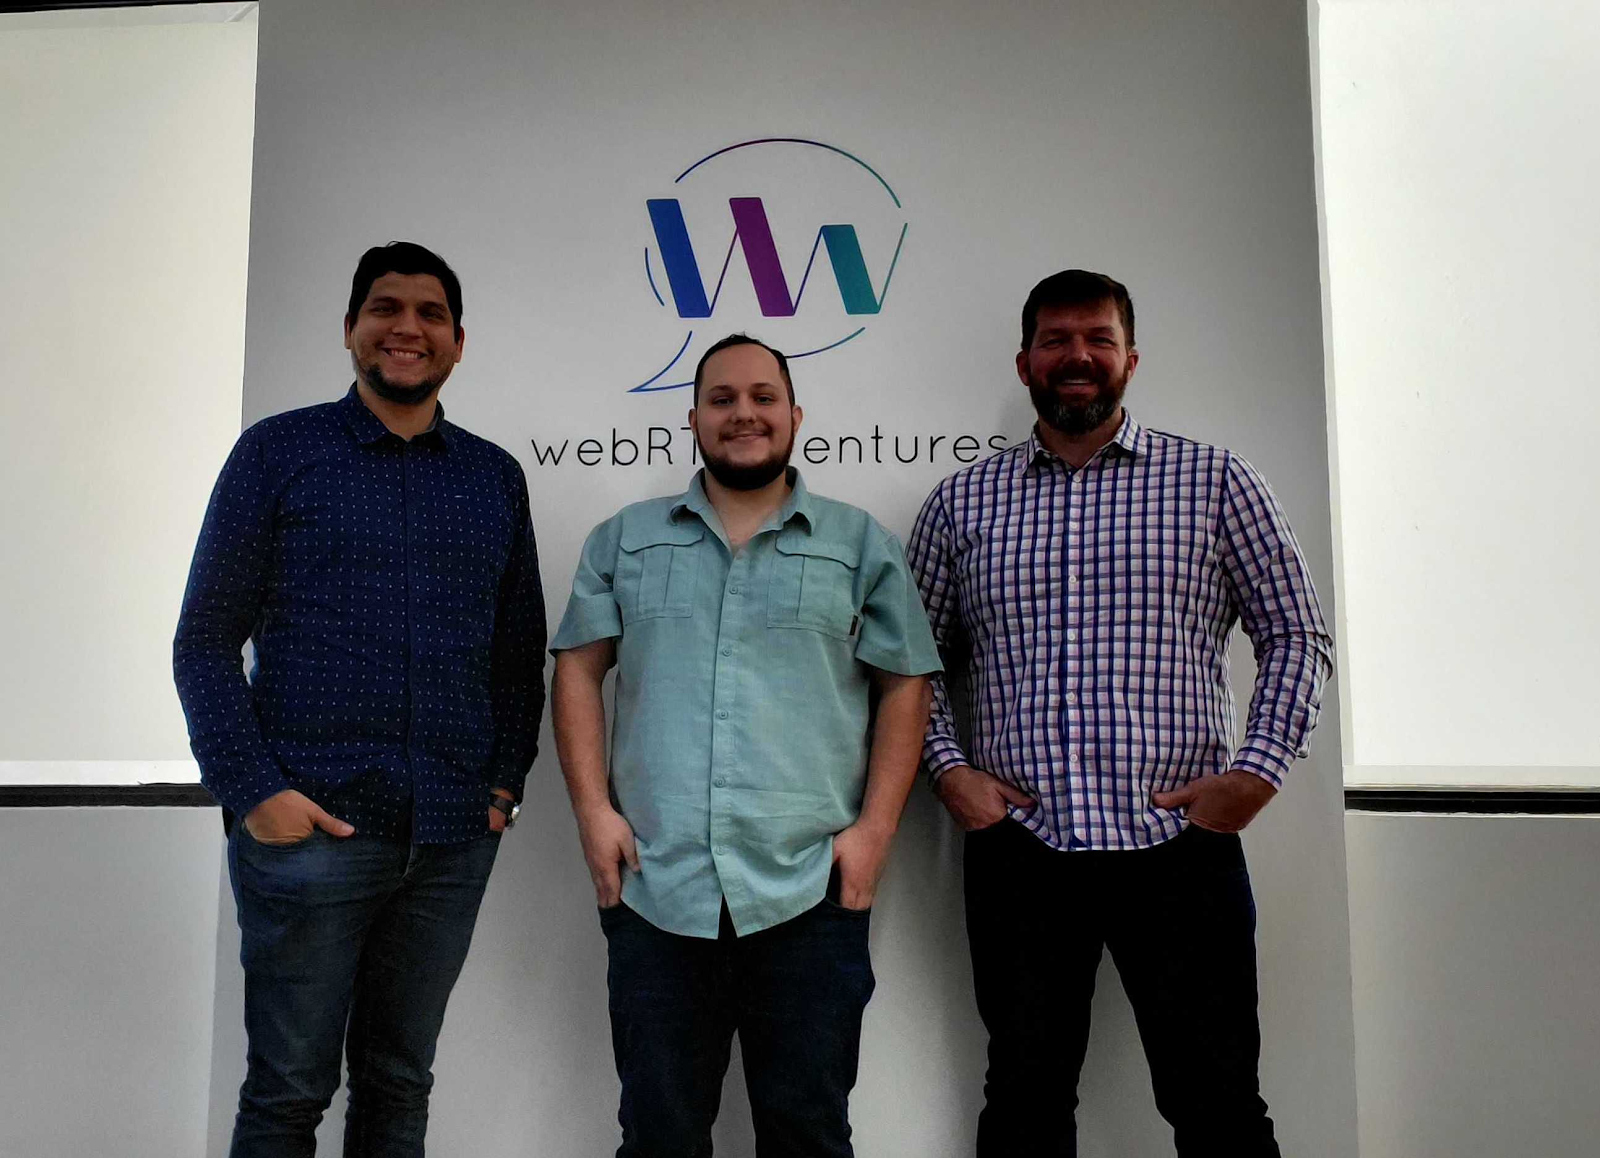 WebRTC.ventures team members opening the Panama City office. From left, Rafael Amberths, Patric Moncada, and Arin Sime (CEO).